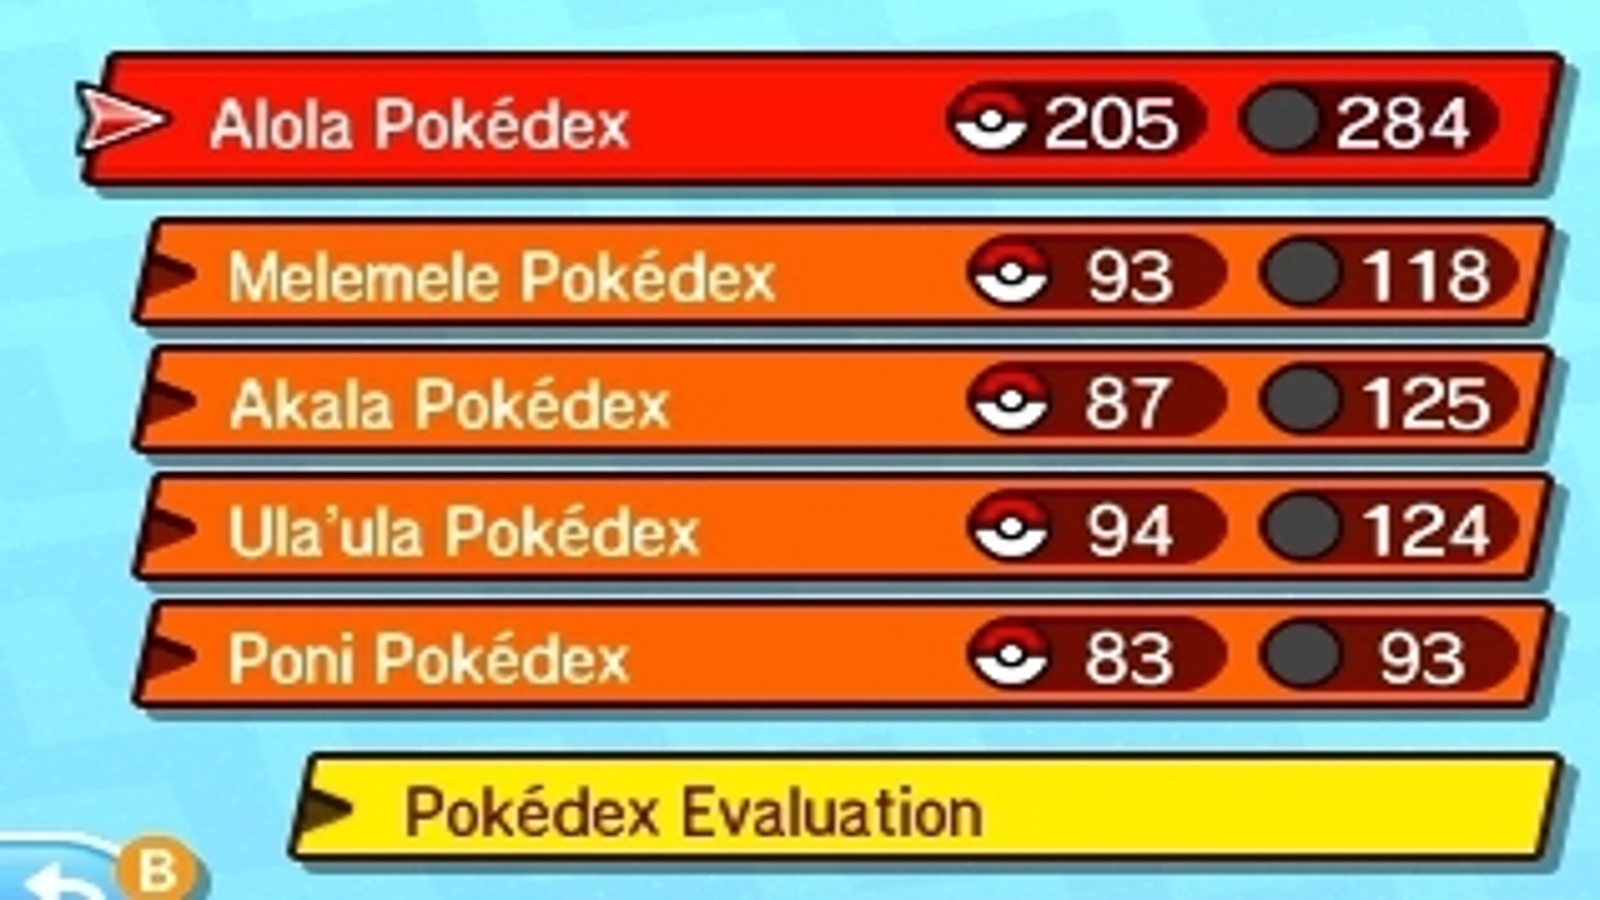 Sun and Moon Pokémon Alola Dex: Locations and more!